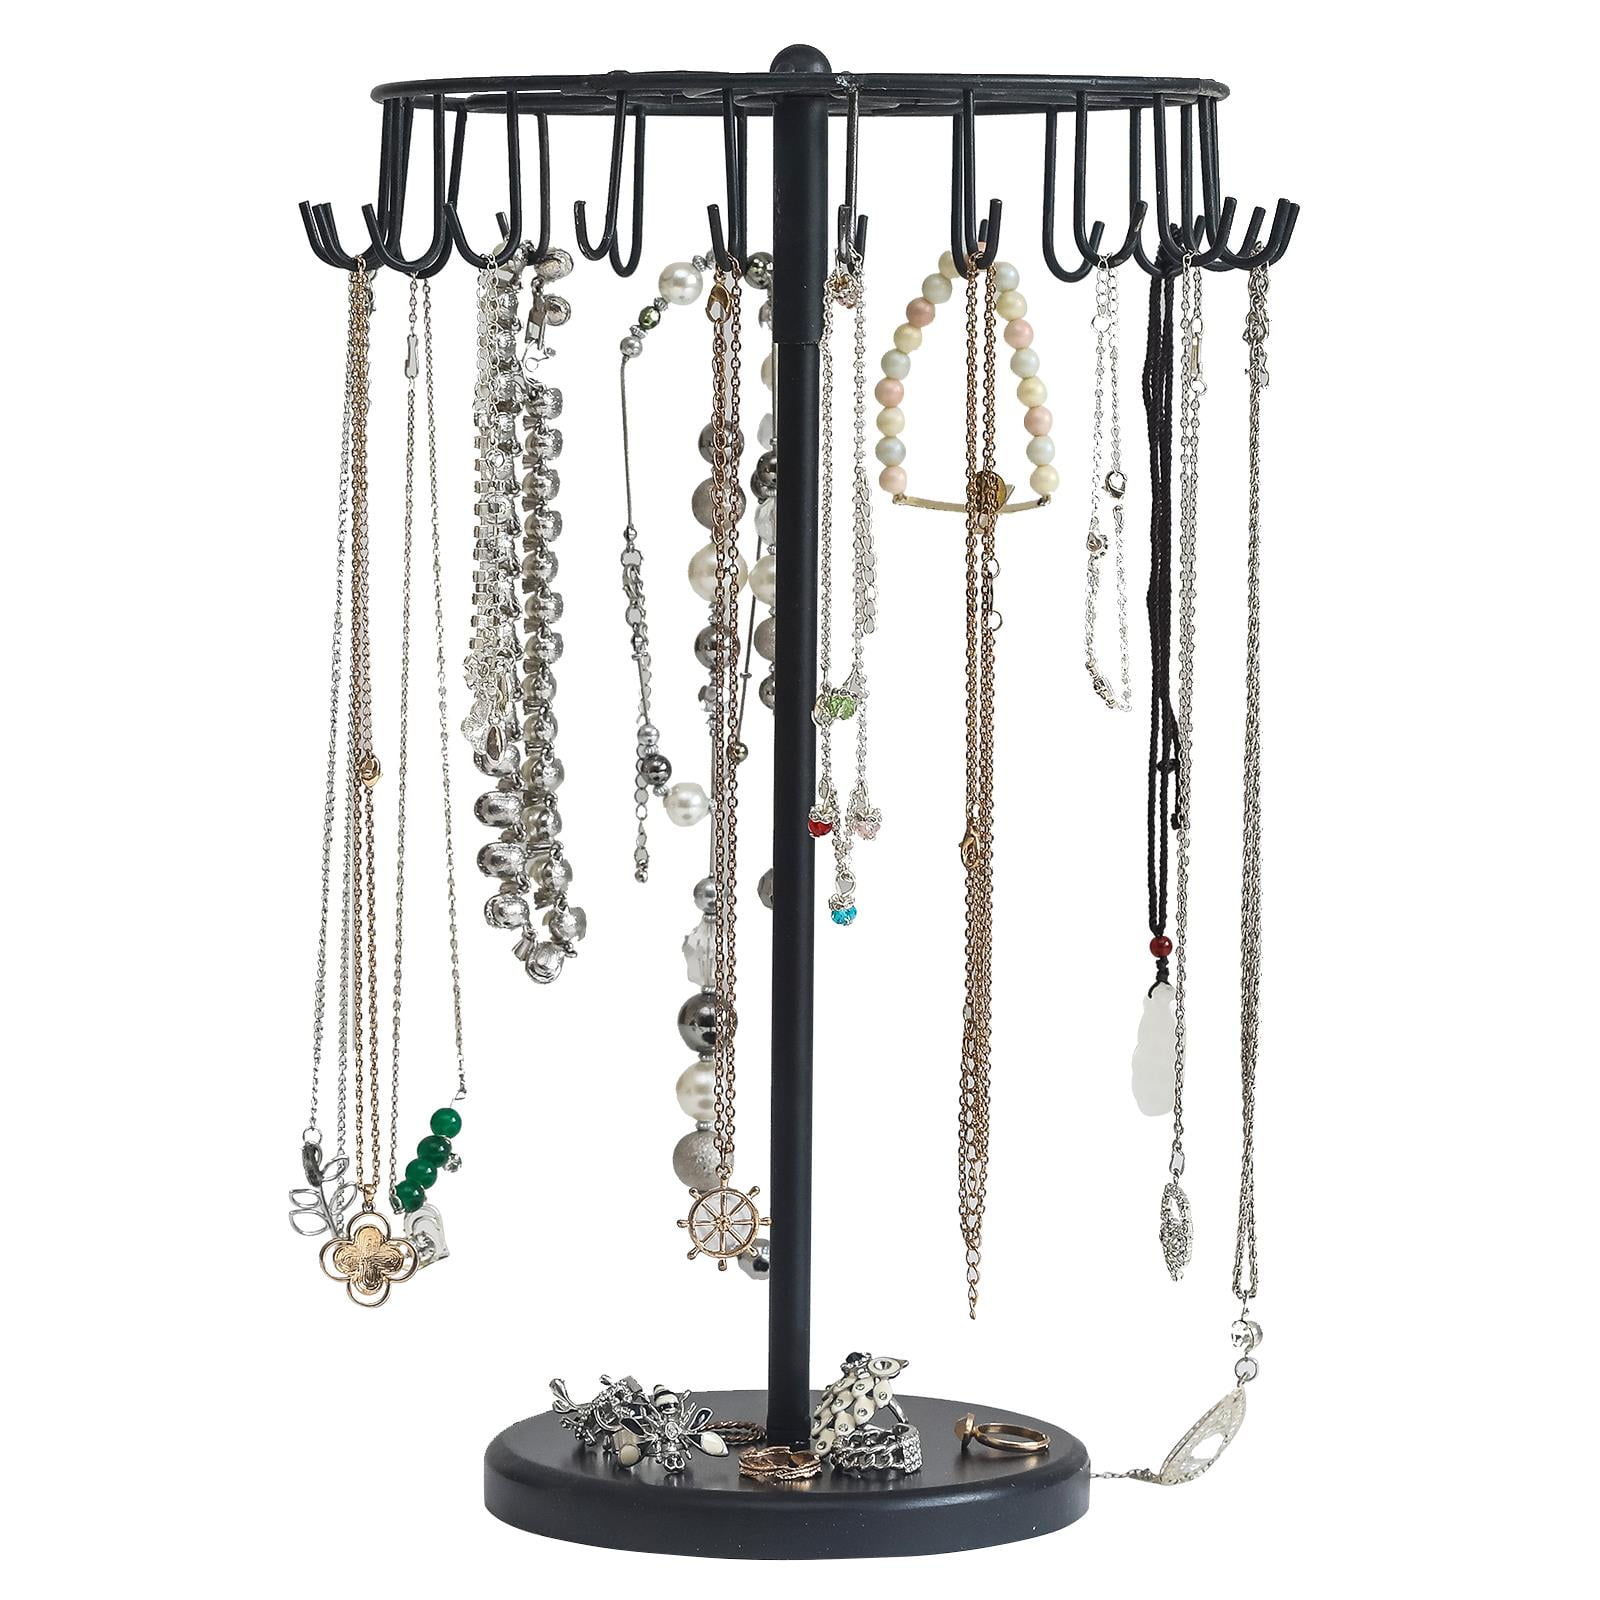 Details about   Tall Rustic Gray Jewelry Display Form  With Platform 